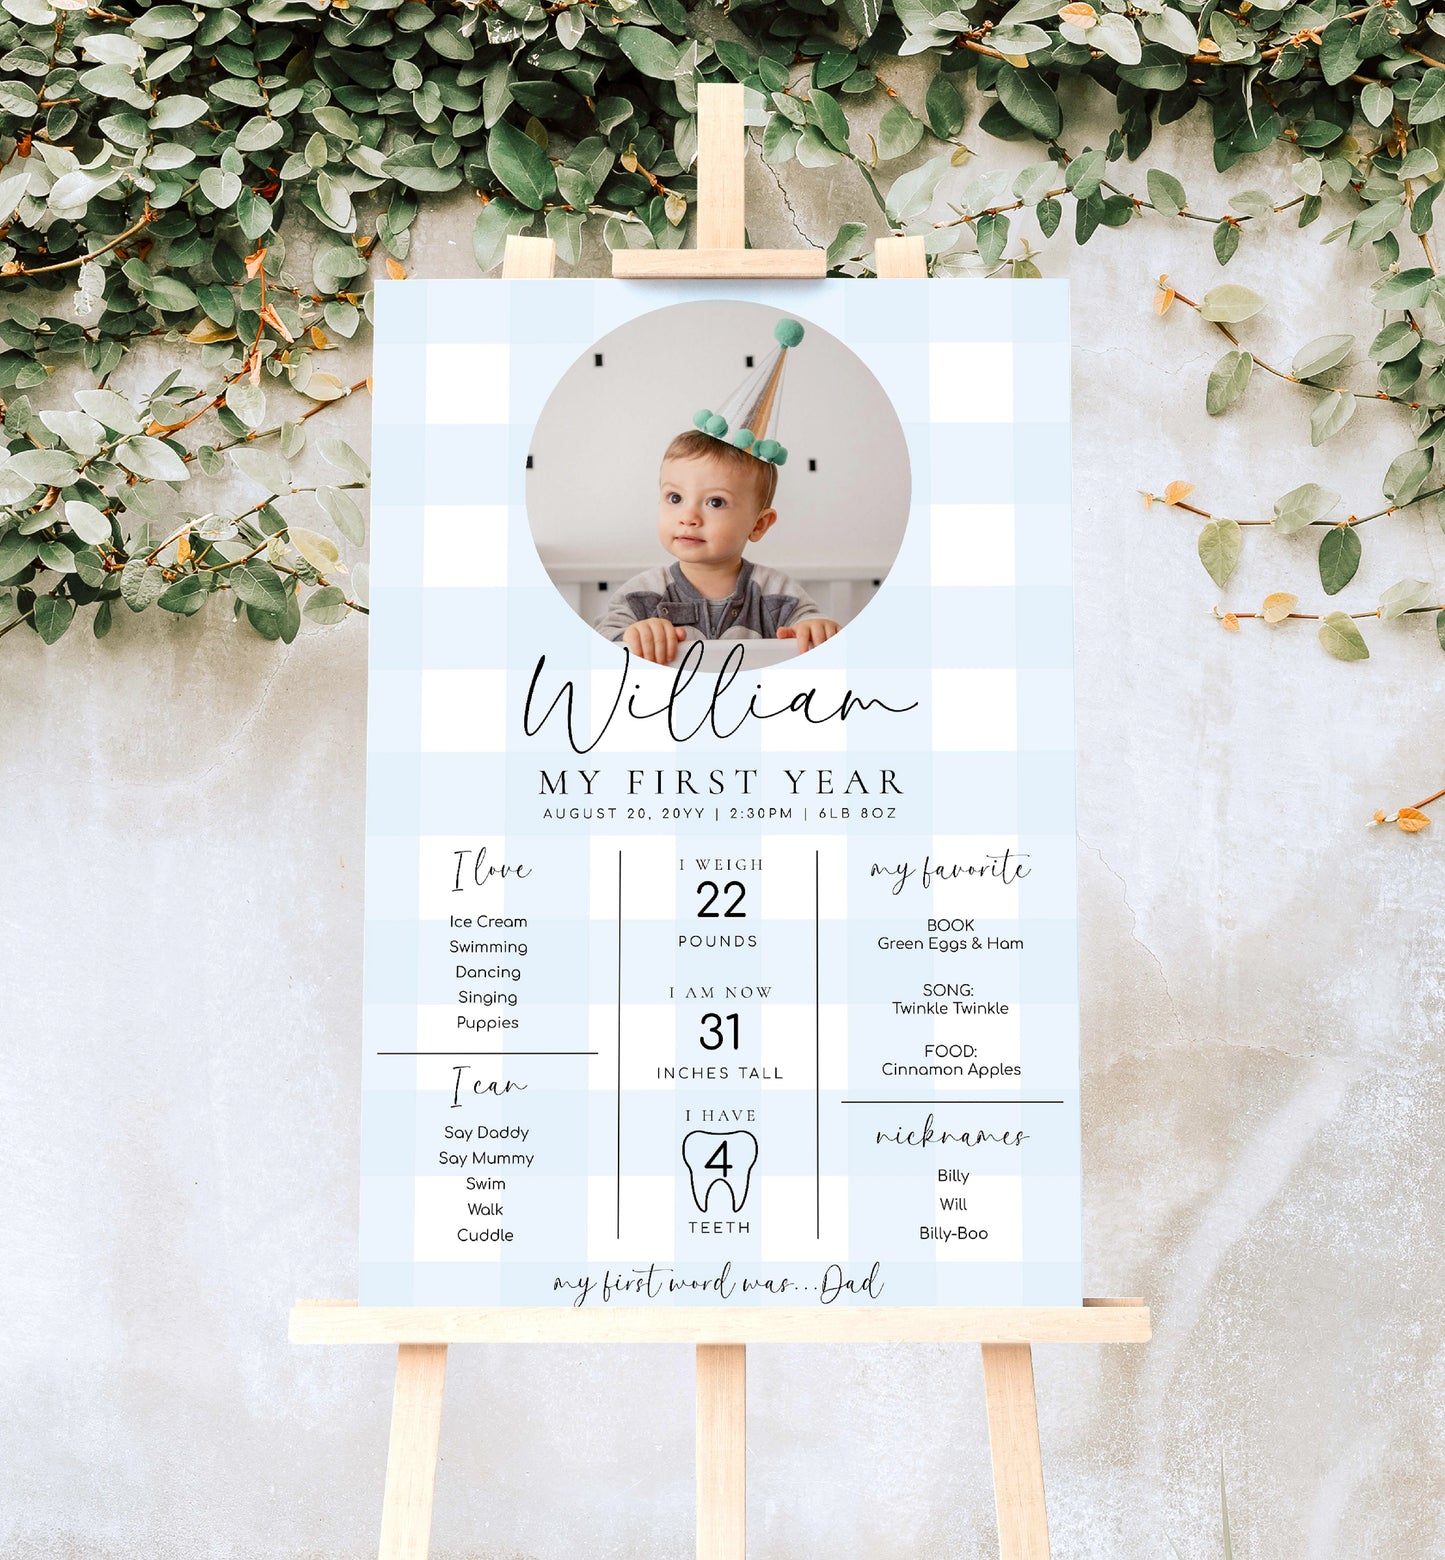 Printable Baby Milestone Board, Blue Gingham Check, Babys First Year Poster, 1st Birthday 12 Months Milestone Photo Banner Sign